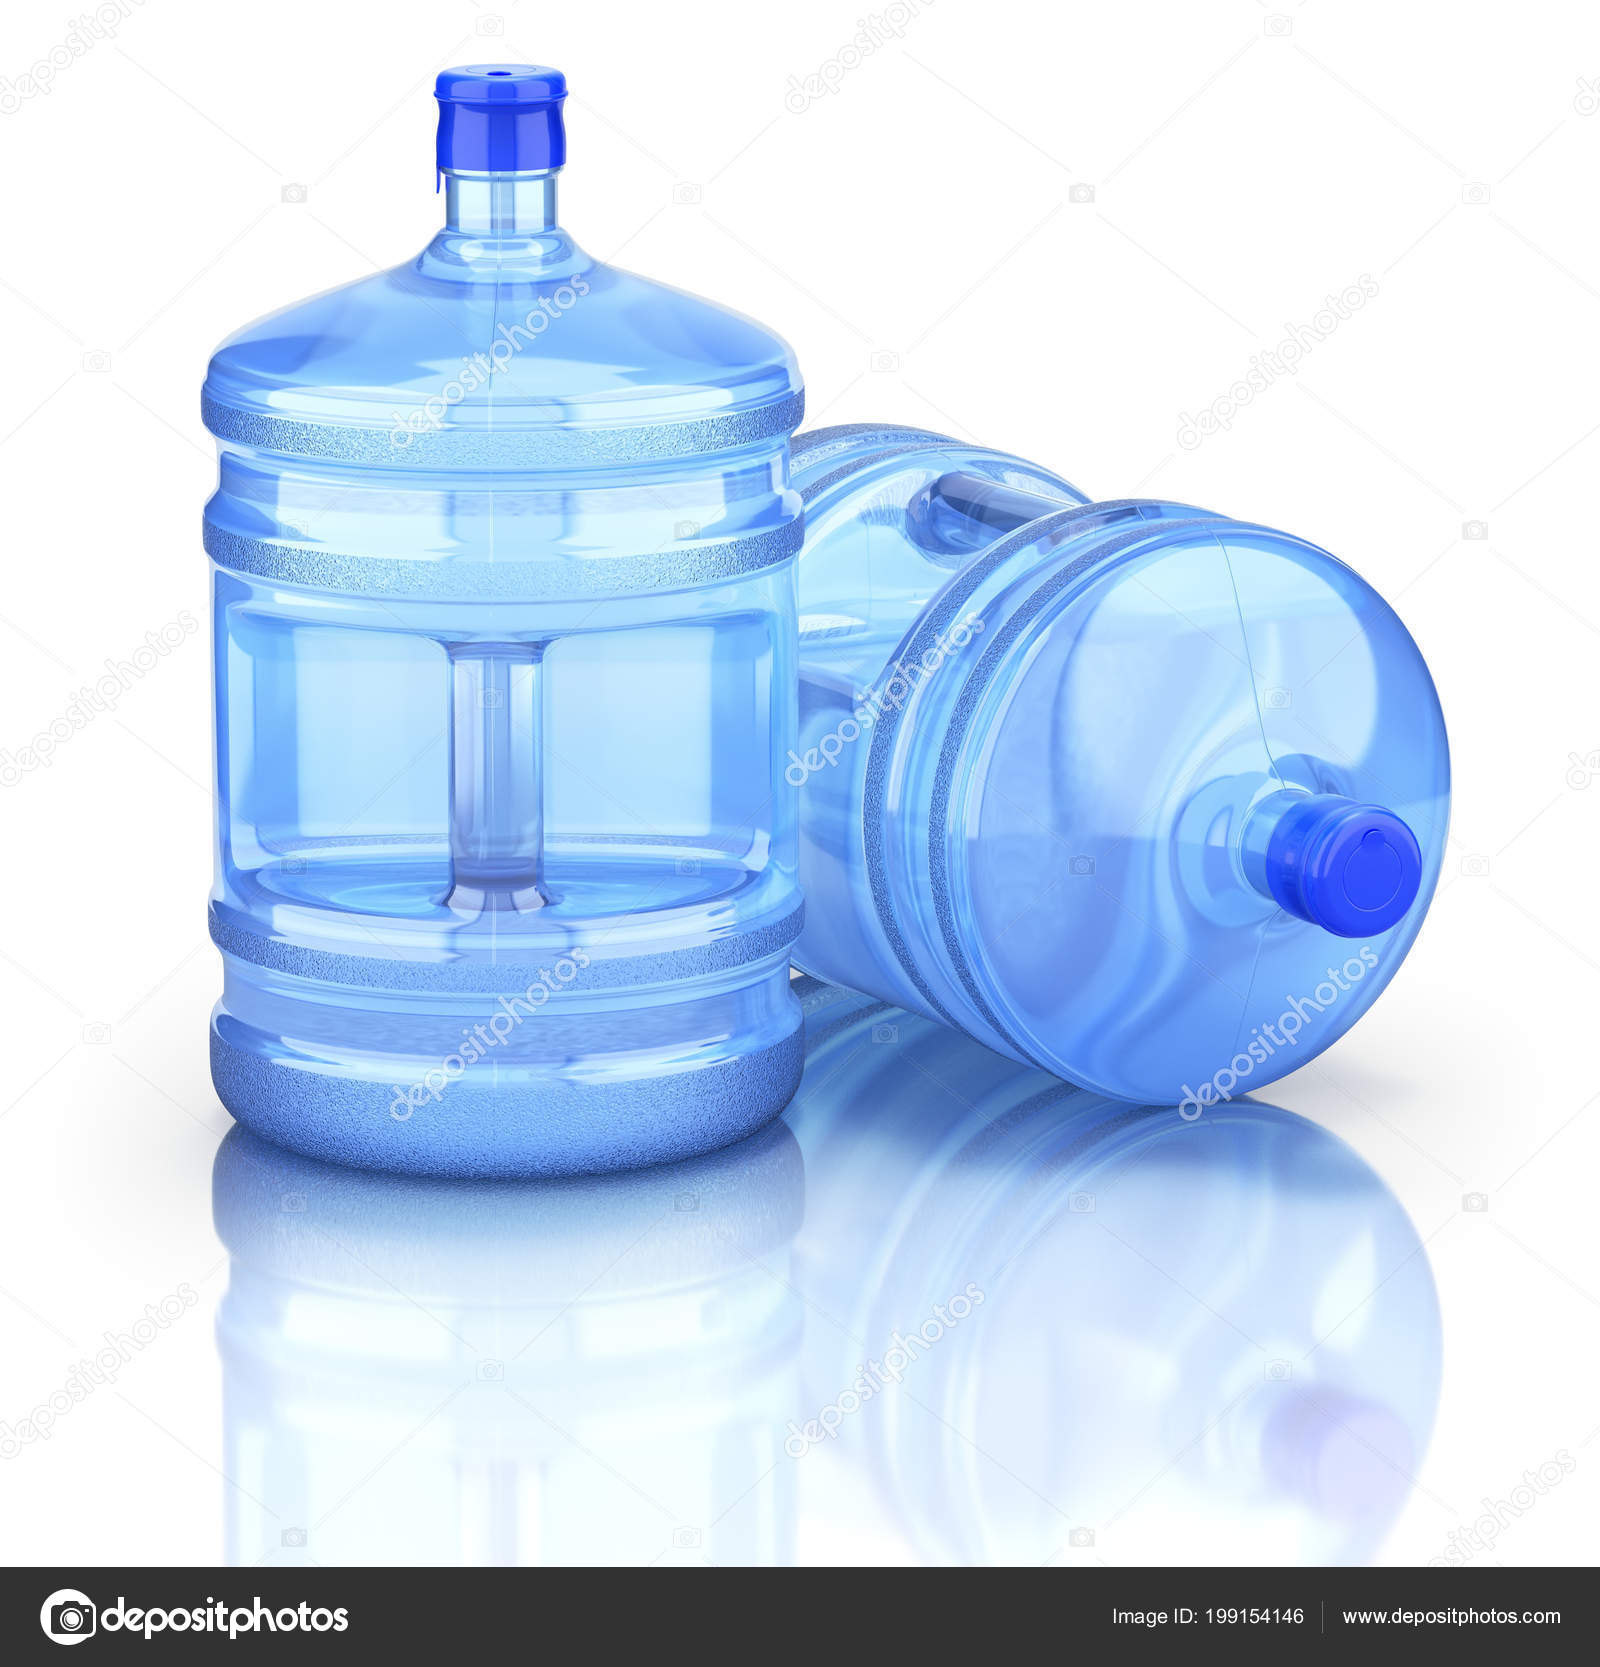 Two Water Dispenser Bottle Reflective Background Illustration Stock Photo  by ©mipan 199154146